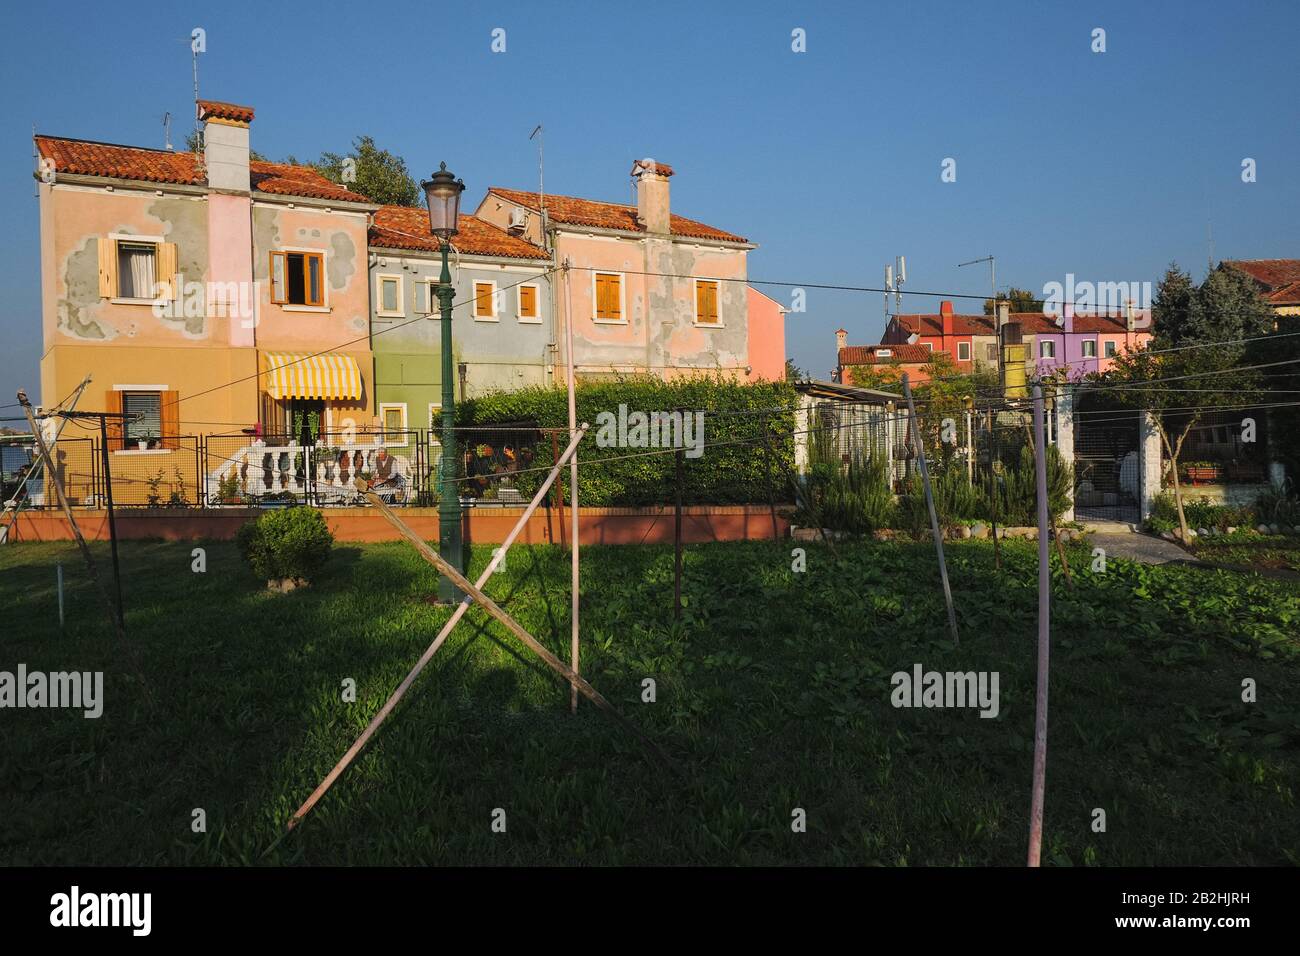 A park and back yards of colourful houses on Calle Malea, the life and architecture of Burano, Venice in early morning light Stock Photo